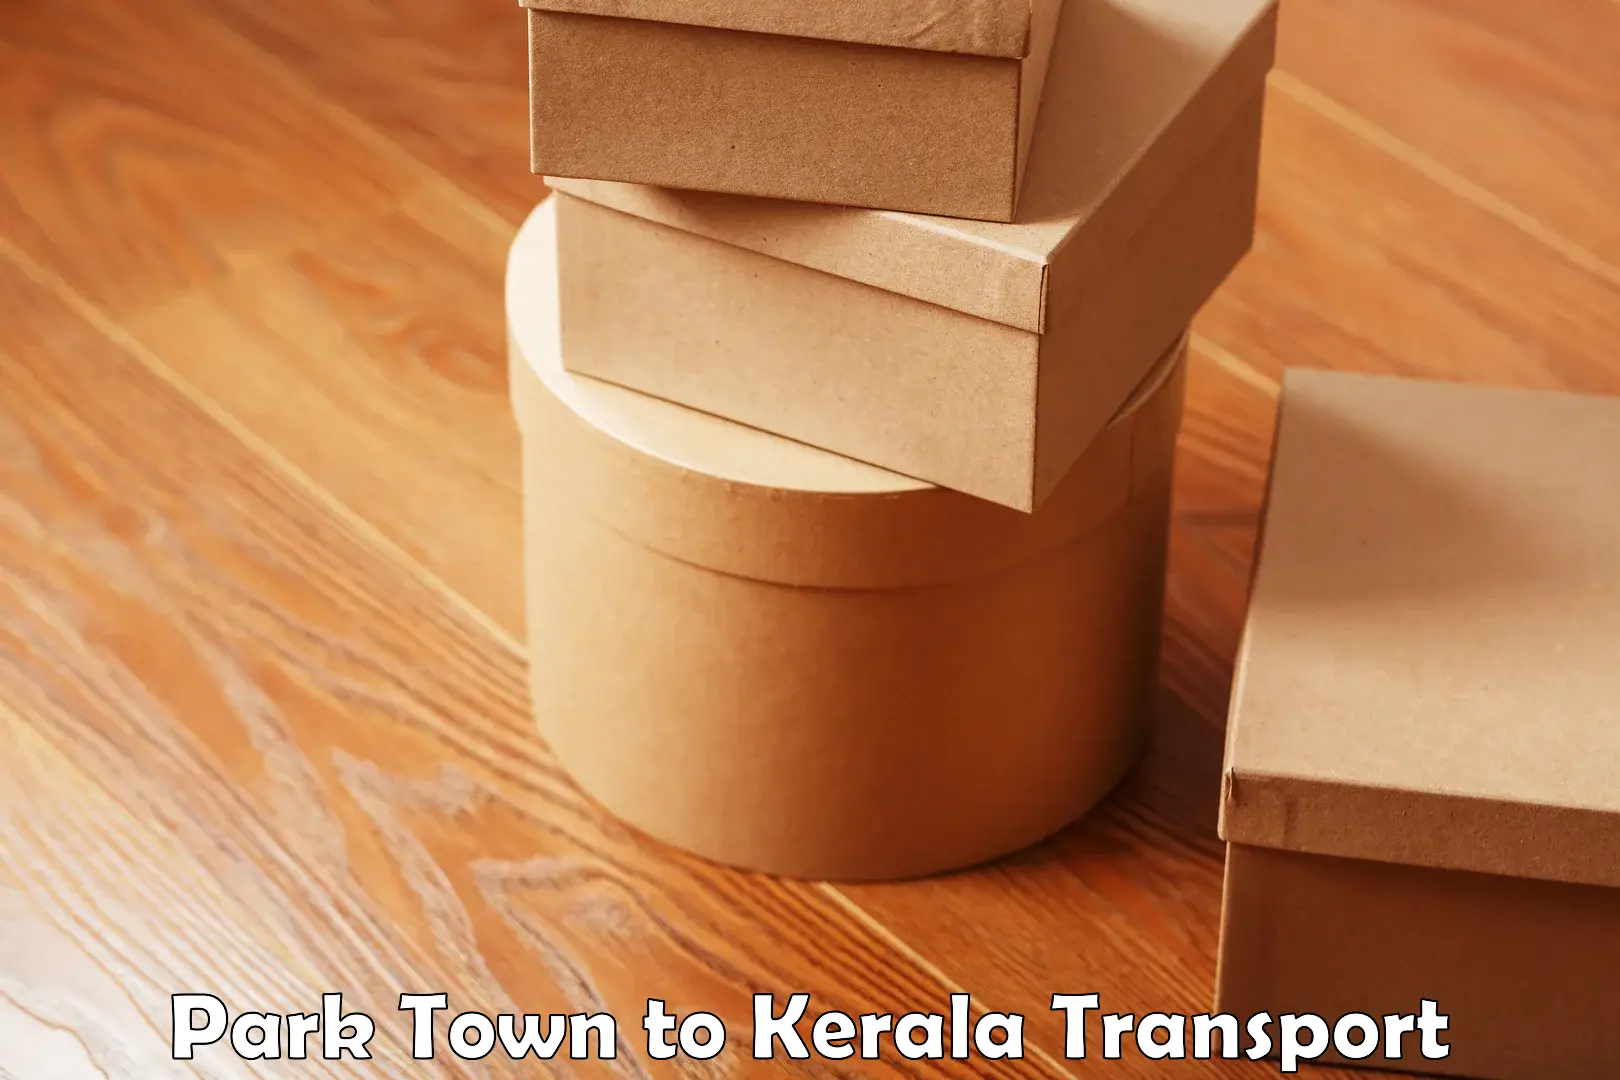 Transportation solution services Park Town to Cochin Port Kochi